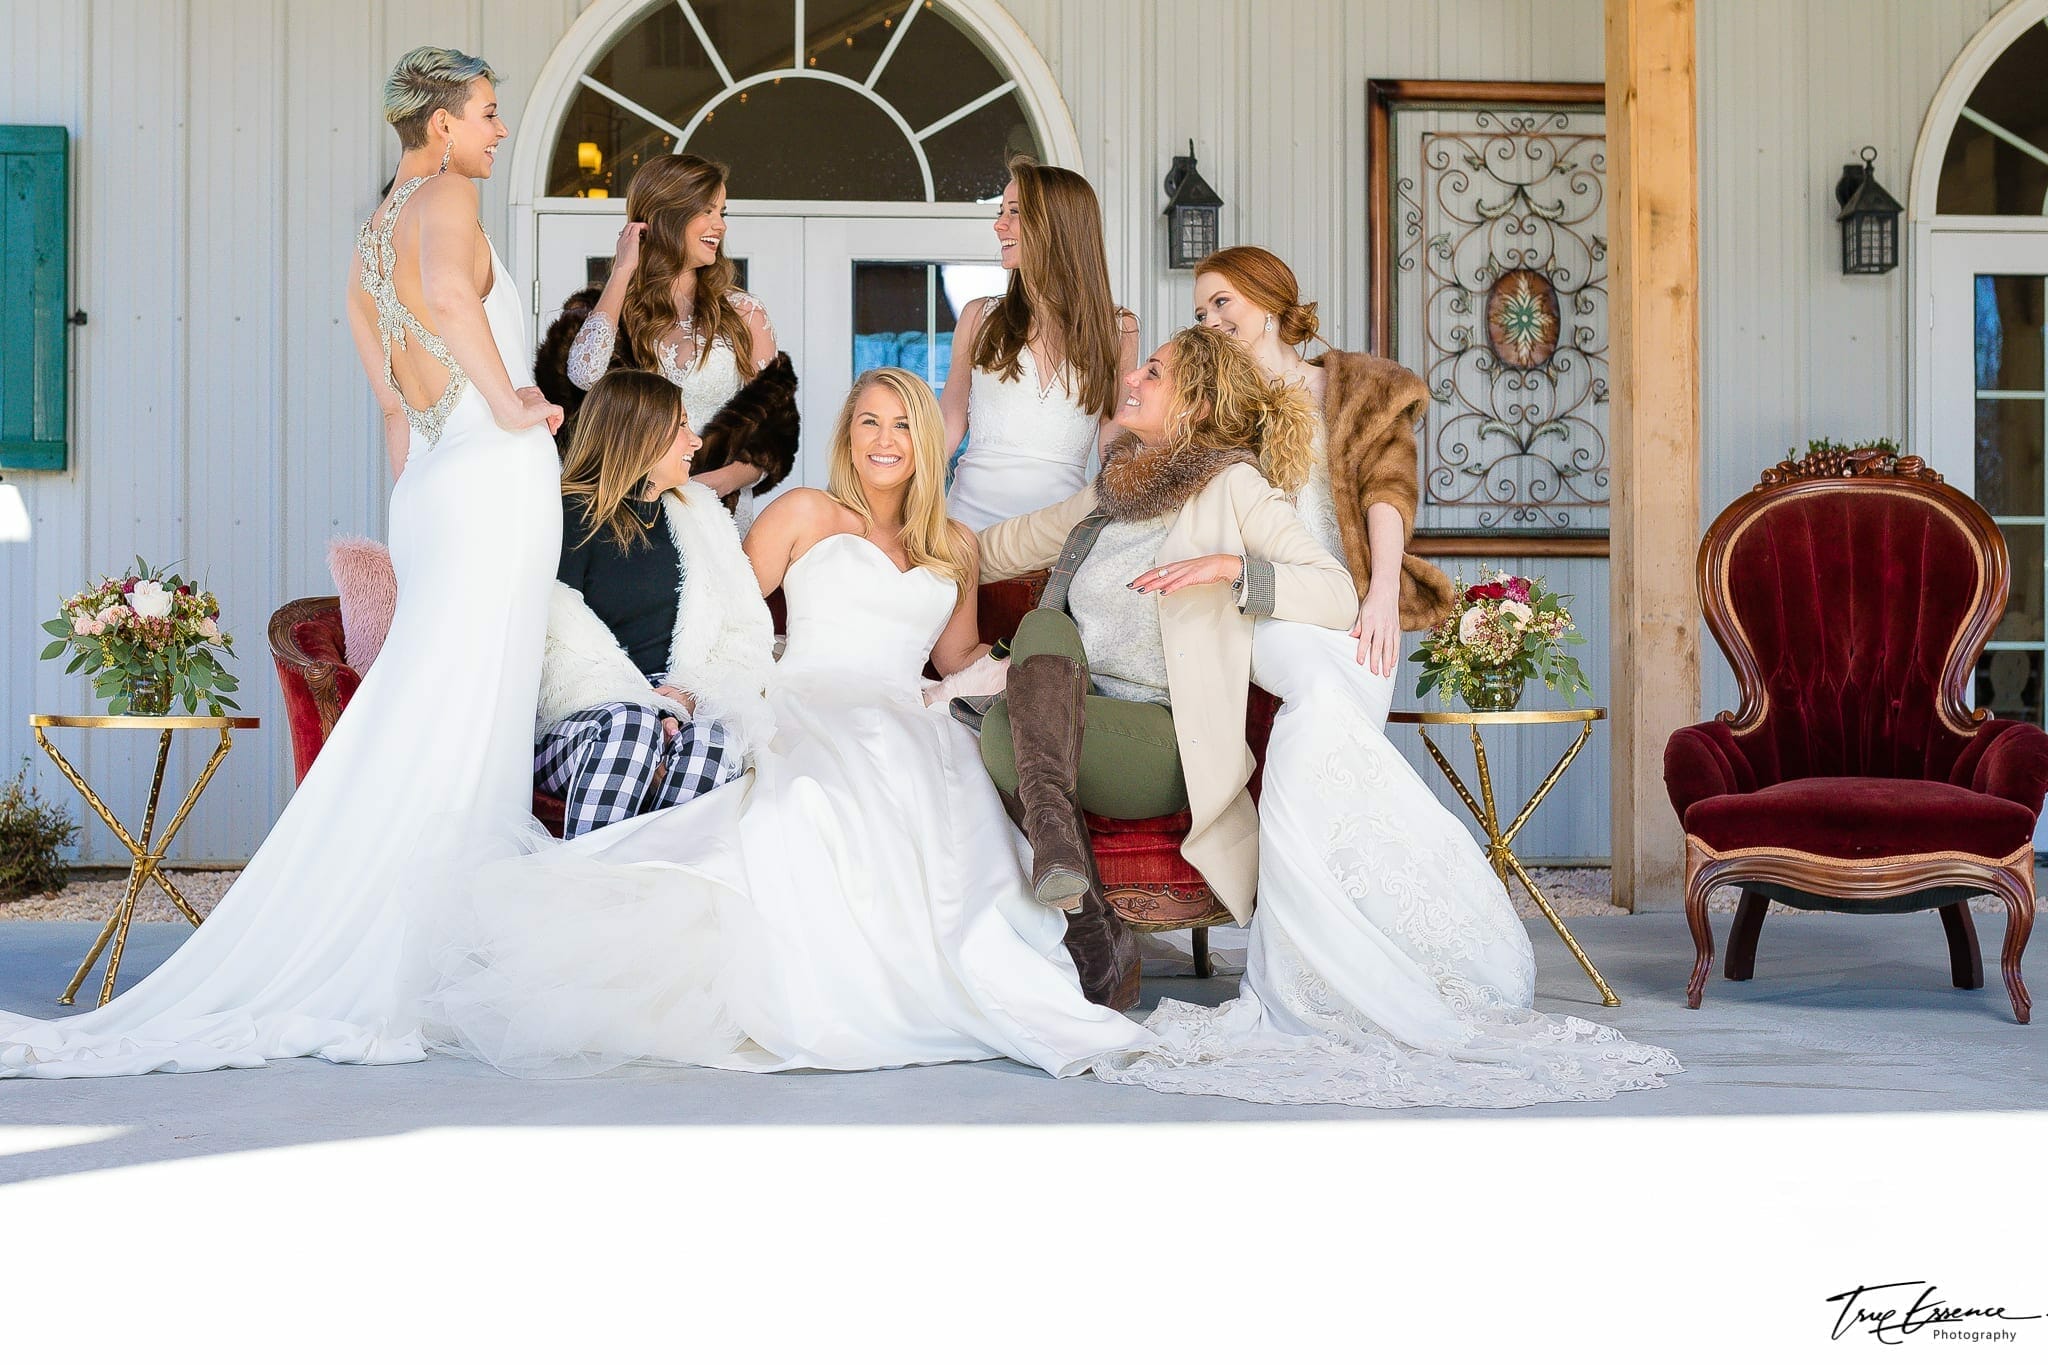 First wedding event help in Greenville, NC to showcase wedding dresses and the wedding venue. But also to talk about the wedding planning process and things to look out for.